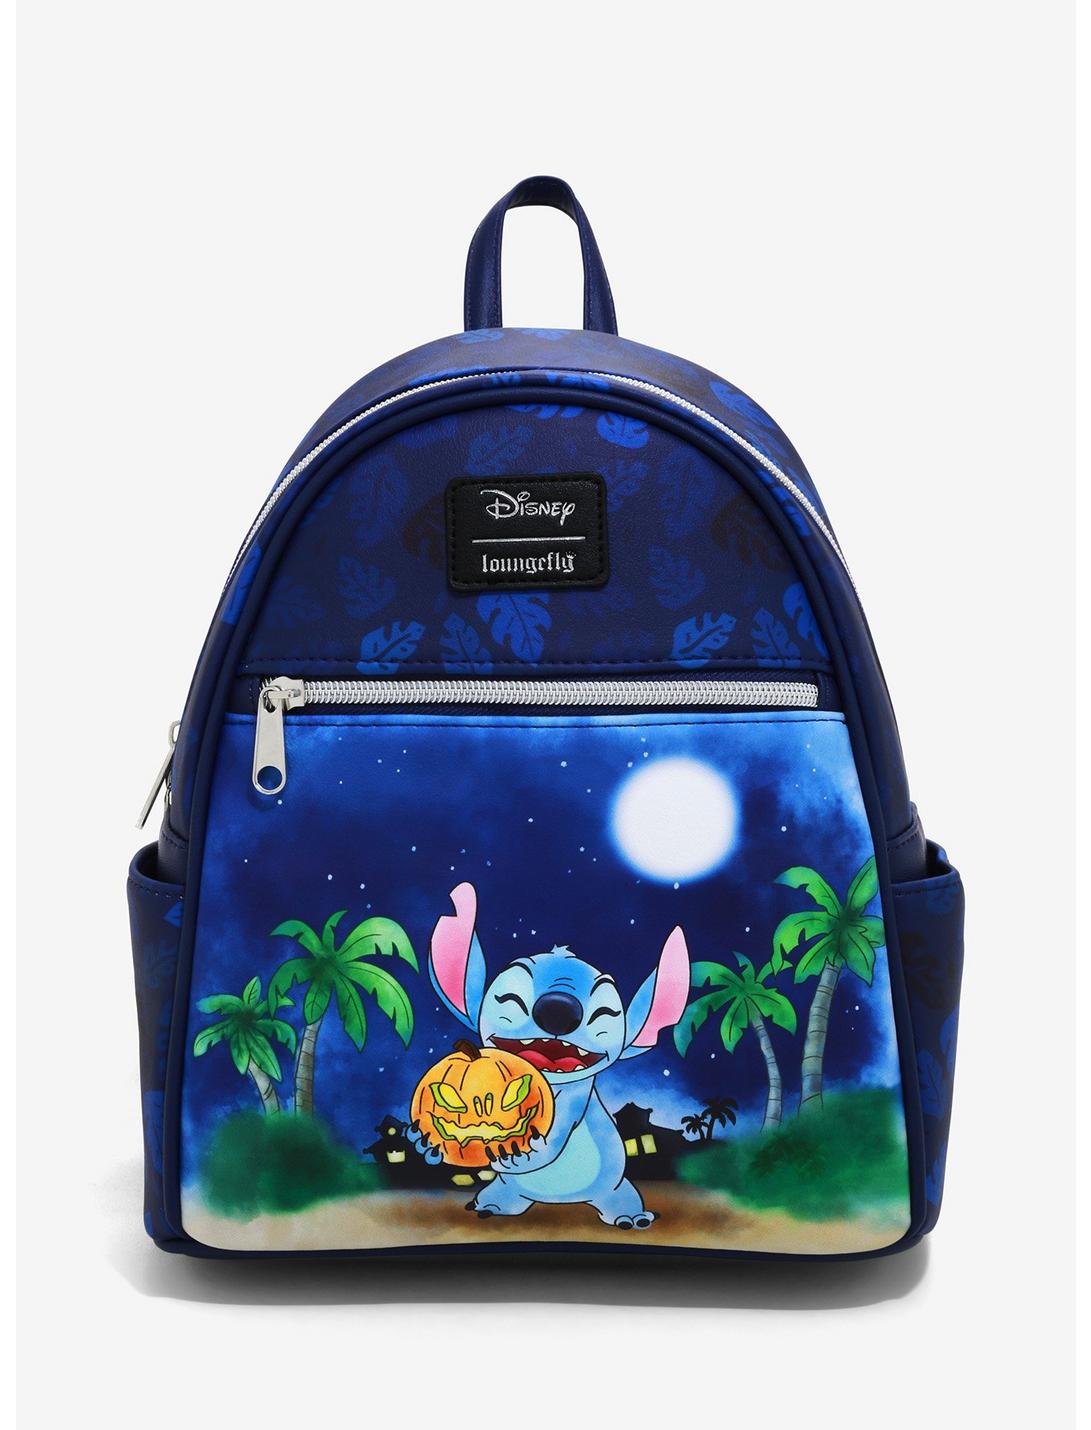 Funko Disney Loungefly Lilo & Stitch Frog Mini Backpack Hot Topic Exclusive NWT 